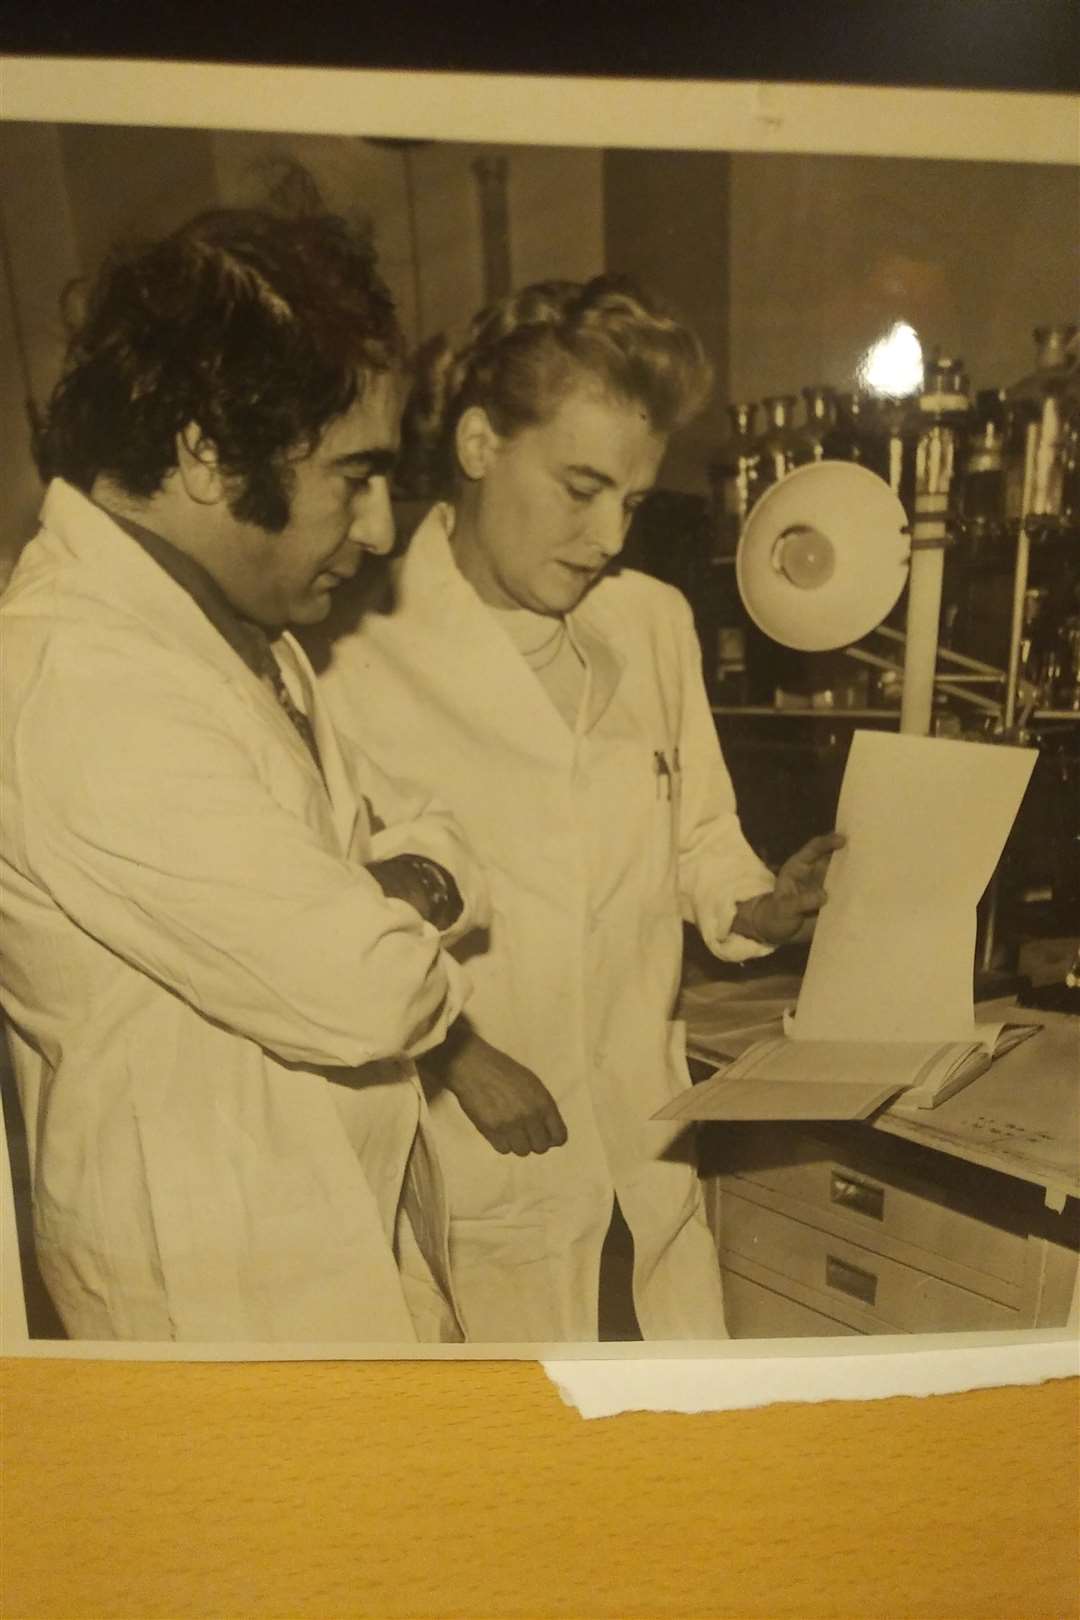 Professor Gregory Gregoriadis with the late Brenda Ryman in their laboratory at the Royal Free School of Medicine in 1971 (Gregory Gregoriadis)